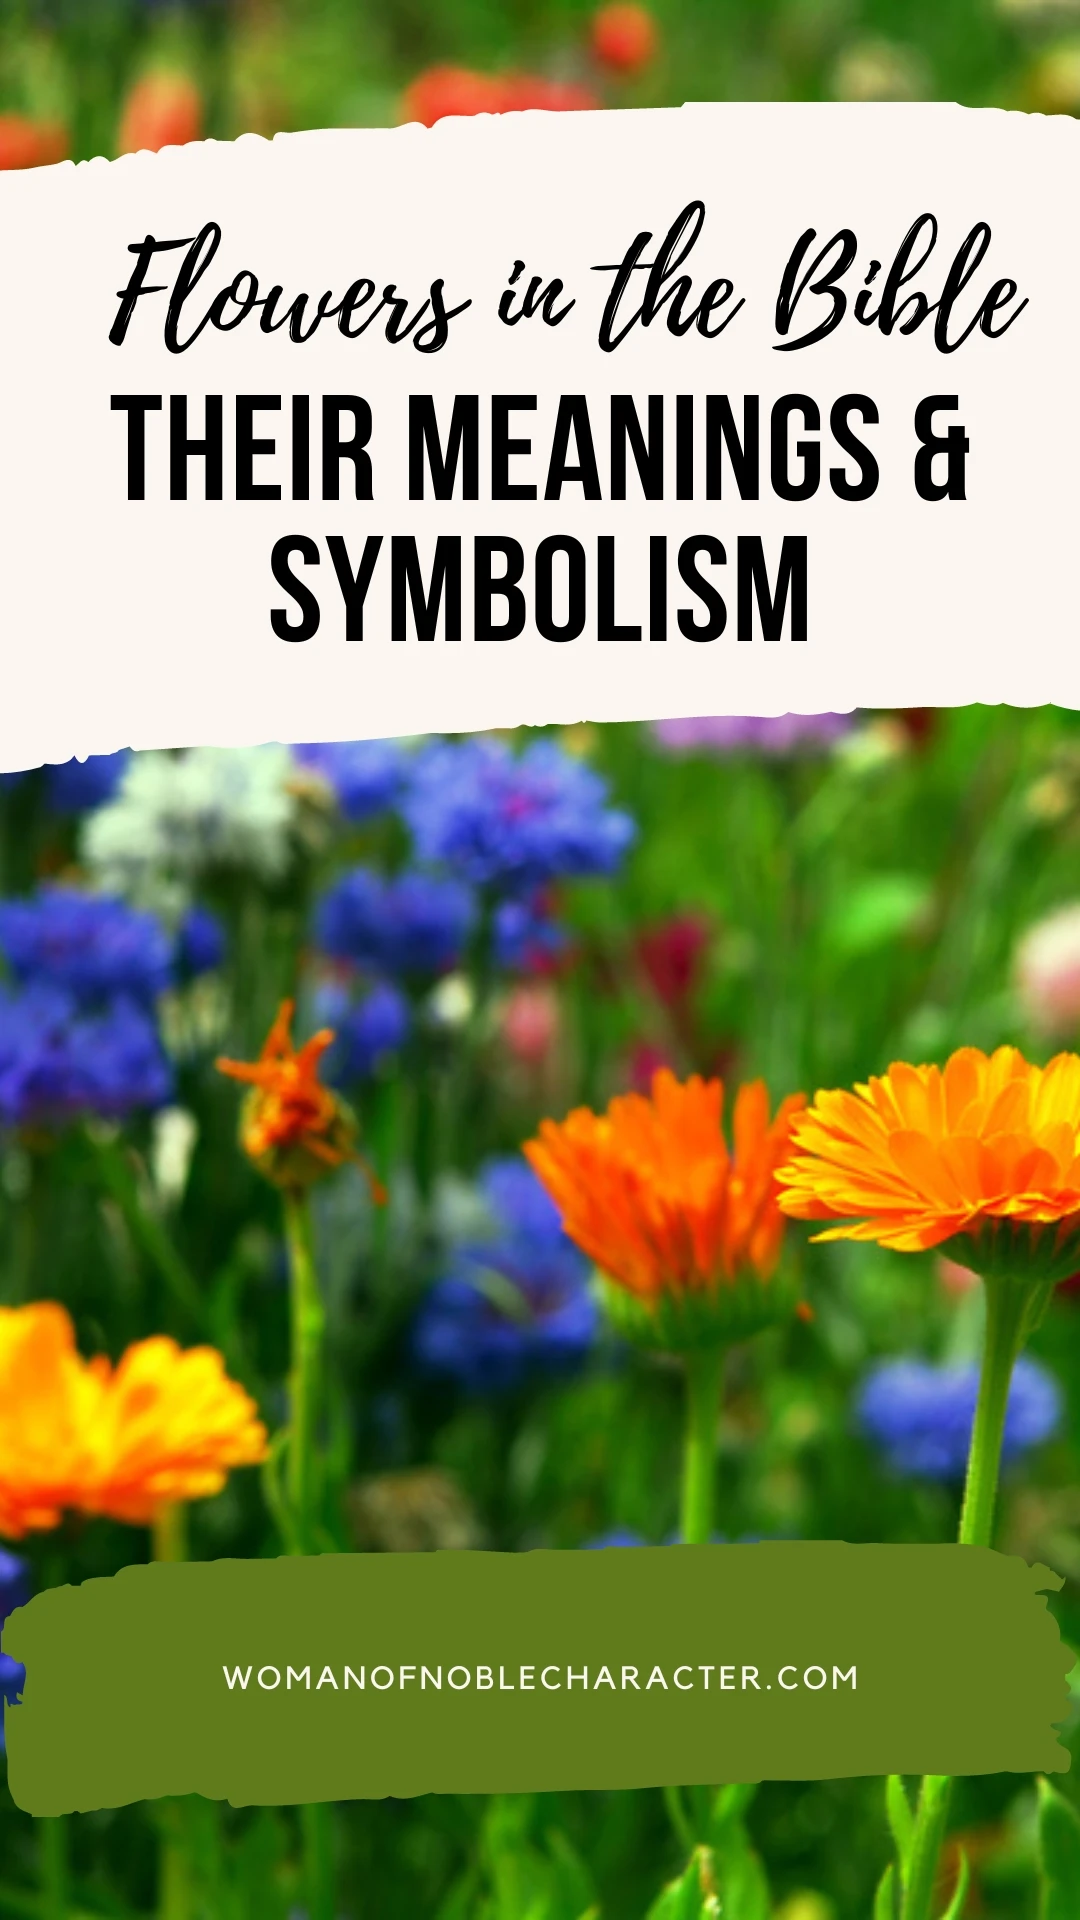 image of flowers in a garden with the text flowers in the Bible, their meanings and symbolism